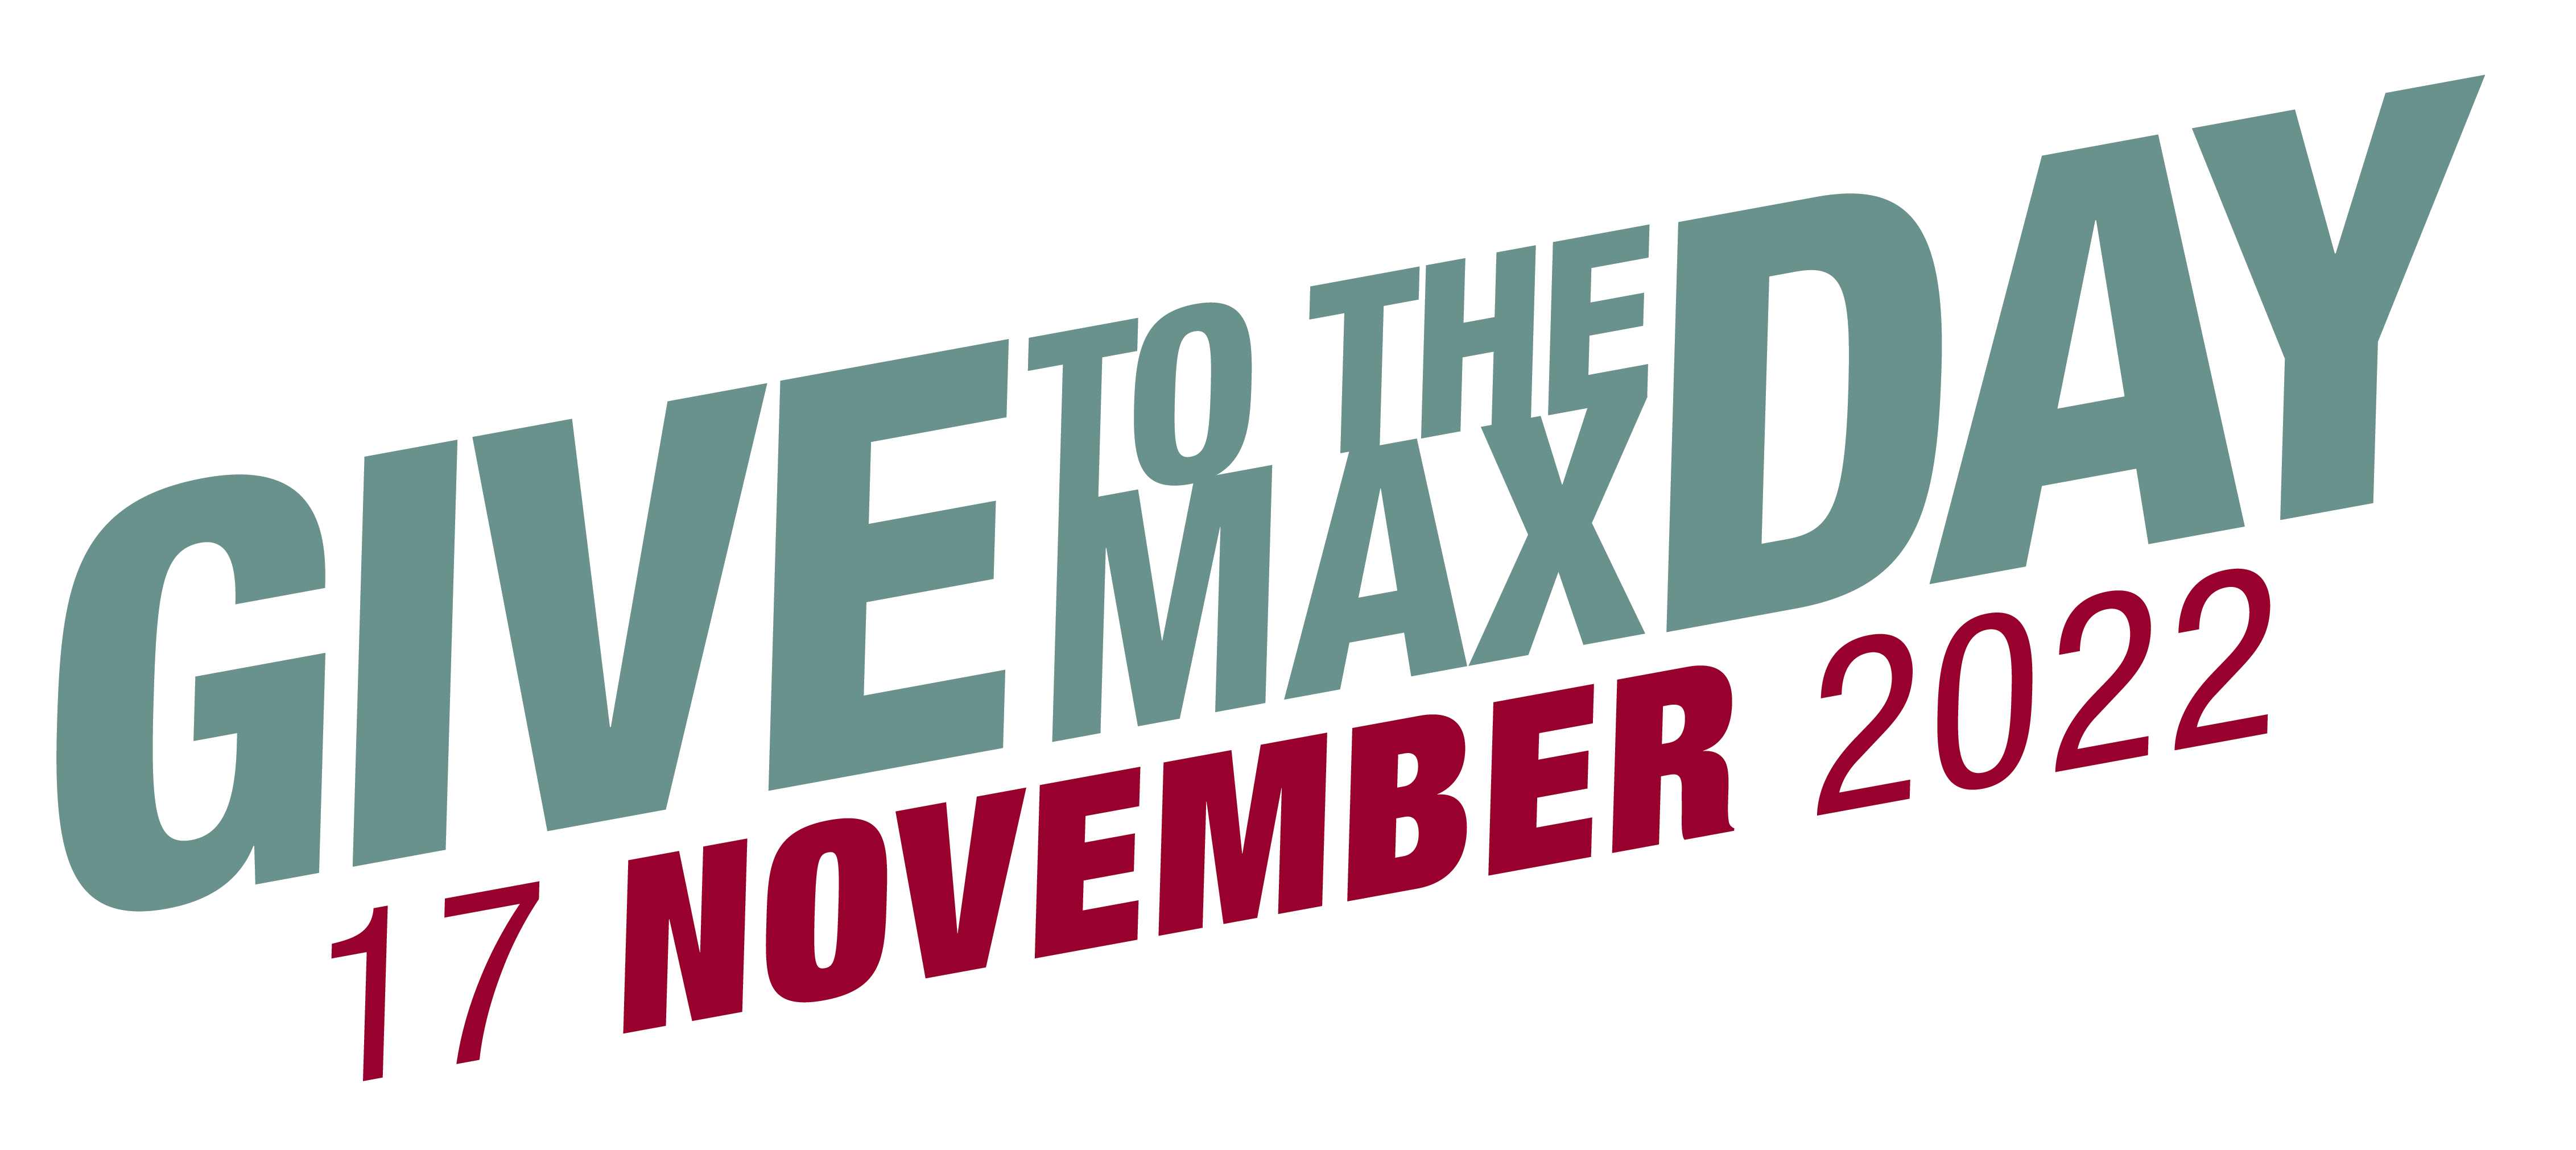 Give to the Max Day 2022